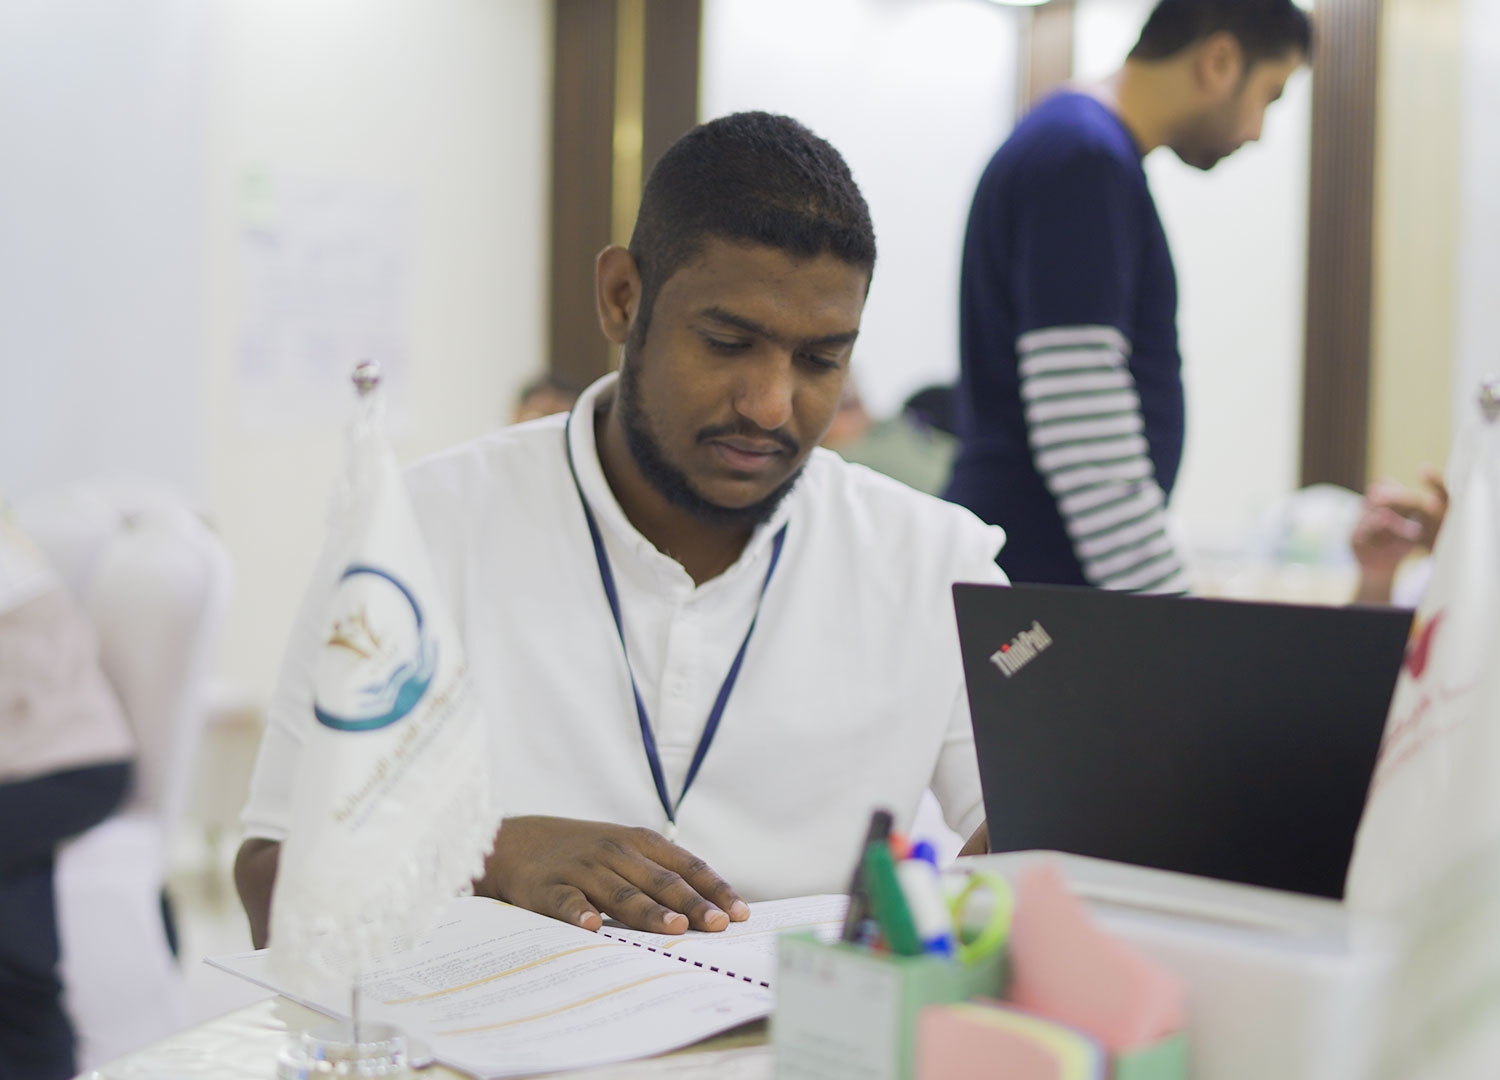 ، From Food Sector Officer to Project Officer What has been the impact of training on Ahmed’s professional growth?